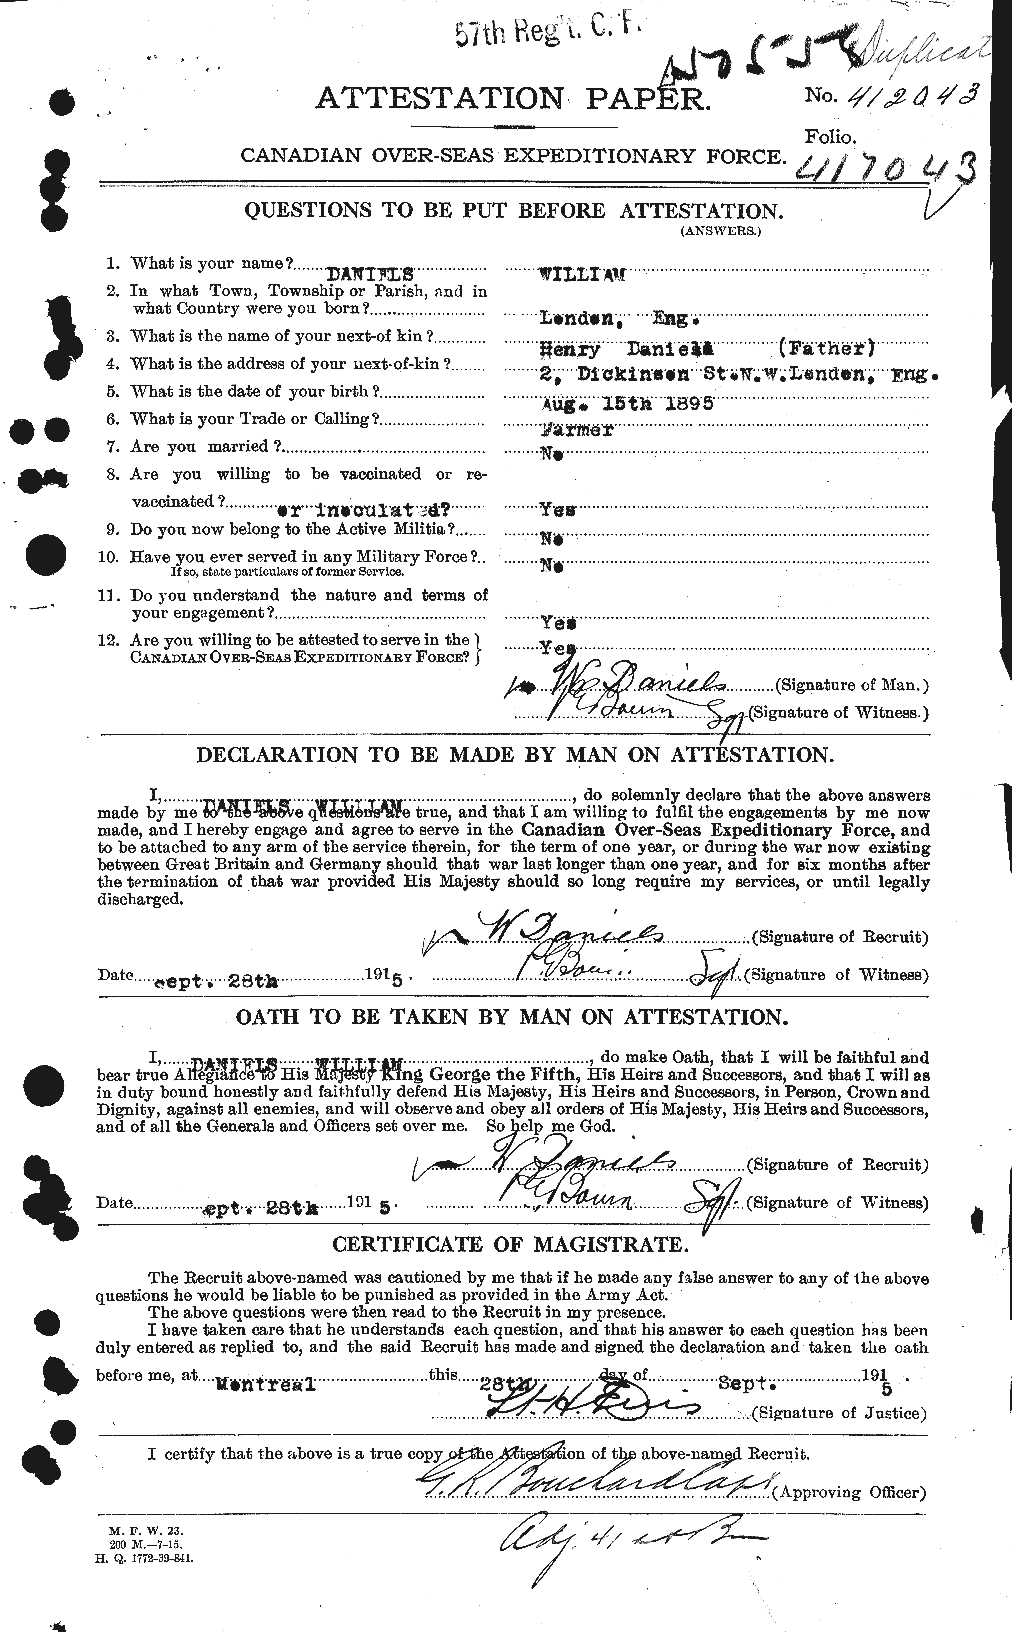 Personnel Records of the First World War - CEF 279693a